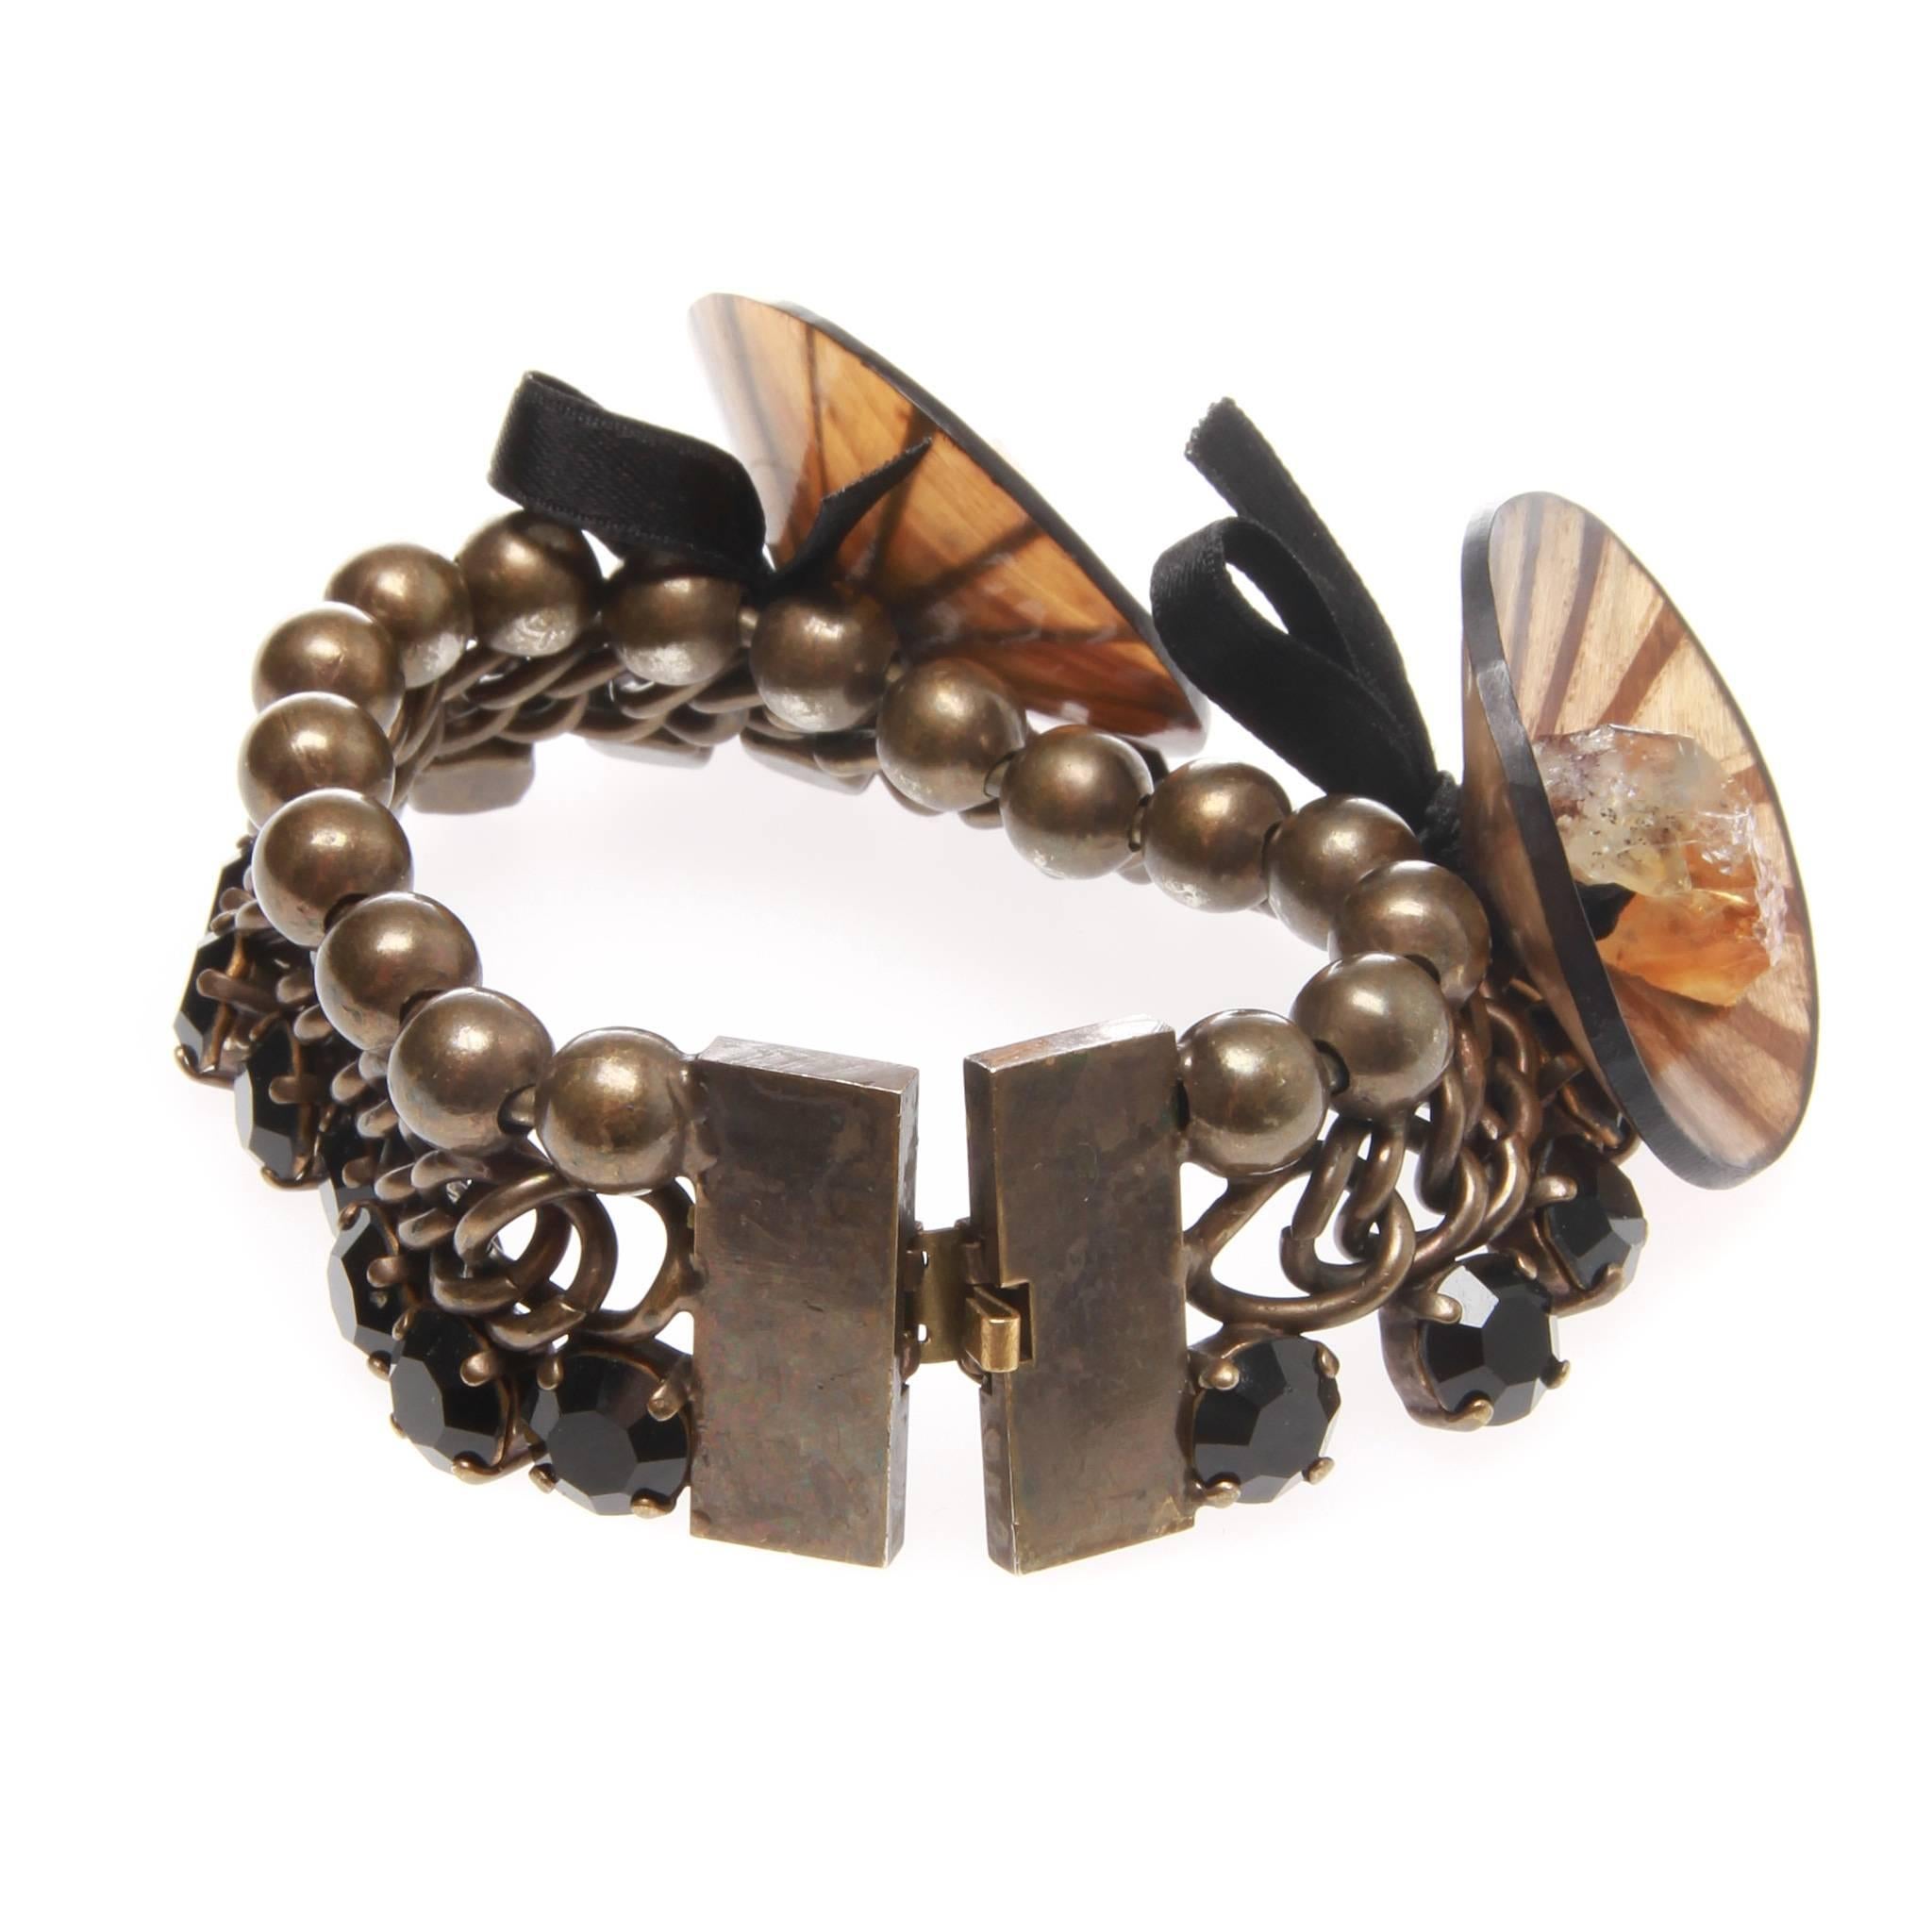 A beautiful MARNI Pyrite-embellished flower bracelet.

Marni brooch has a ball-trimmed chain, black Swarovski crystal embellishment, ribbon bows beneath flowers and a push-lock clasp to fasten to wrist.
Light-brown and black floral horn flower